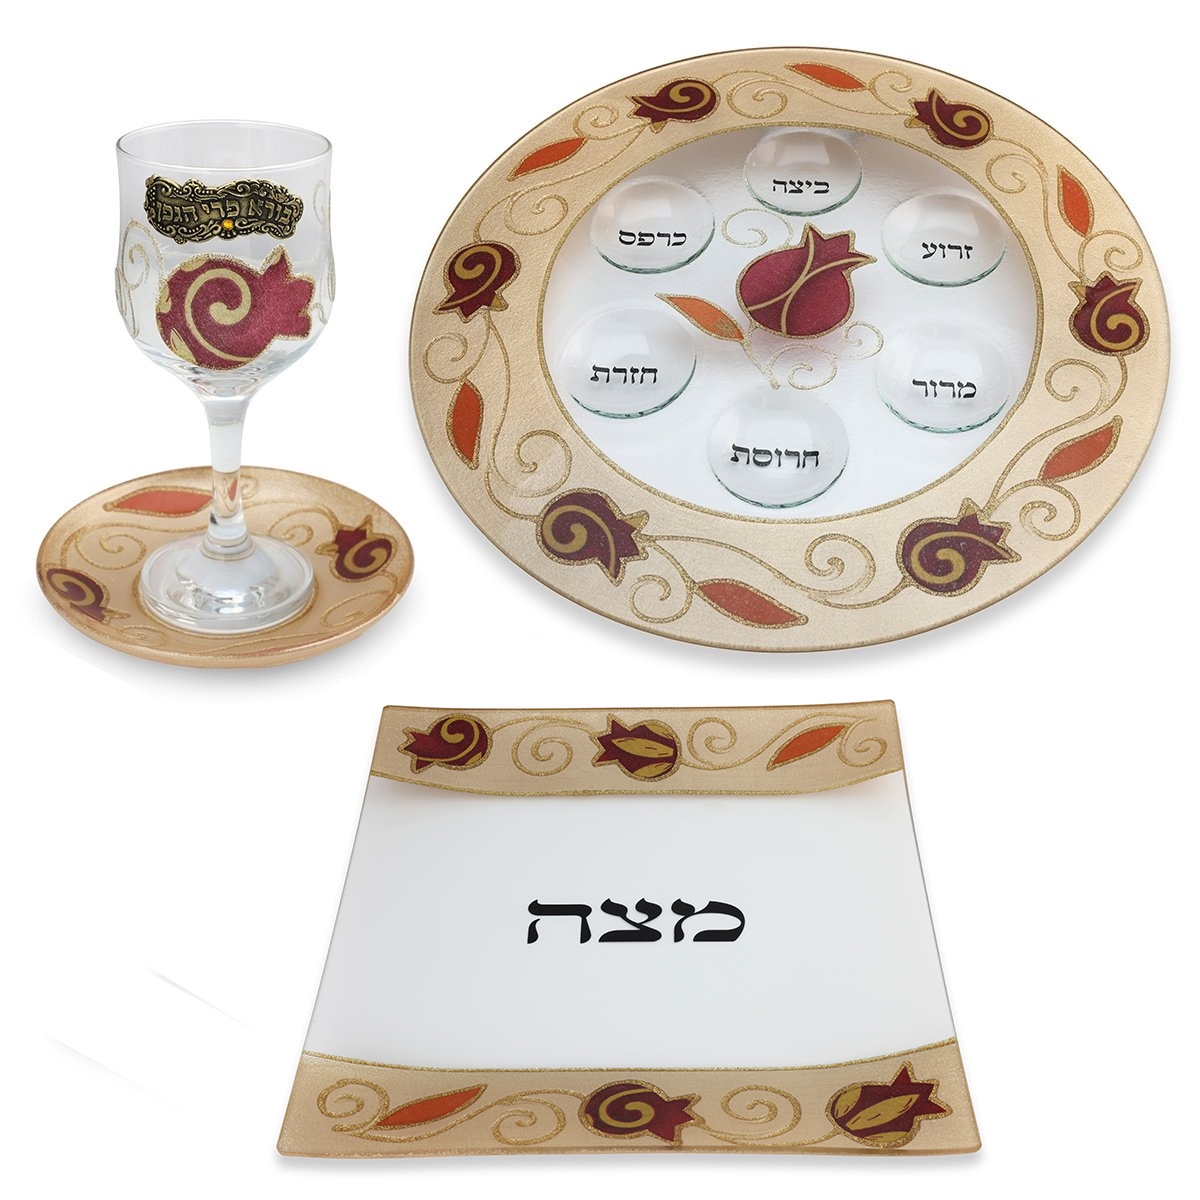 Must-Have Passover Seder Set By Lily Art - Pomegranates (Red) - 1